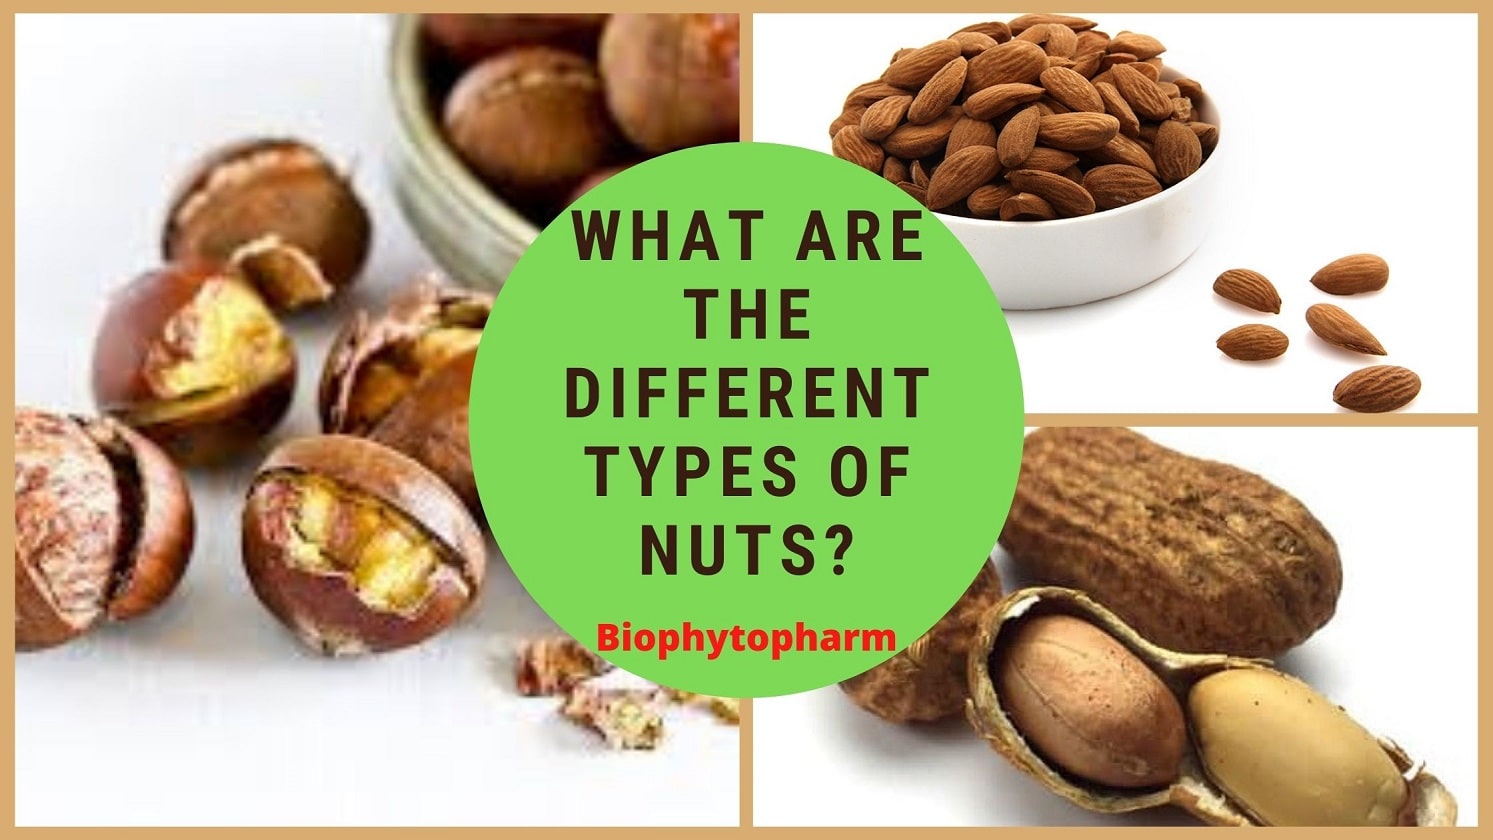 What Are The Different Types of Nuts